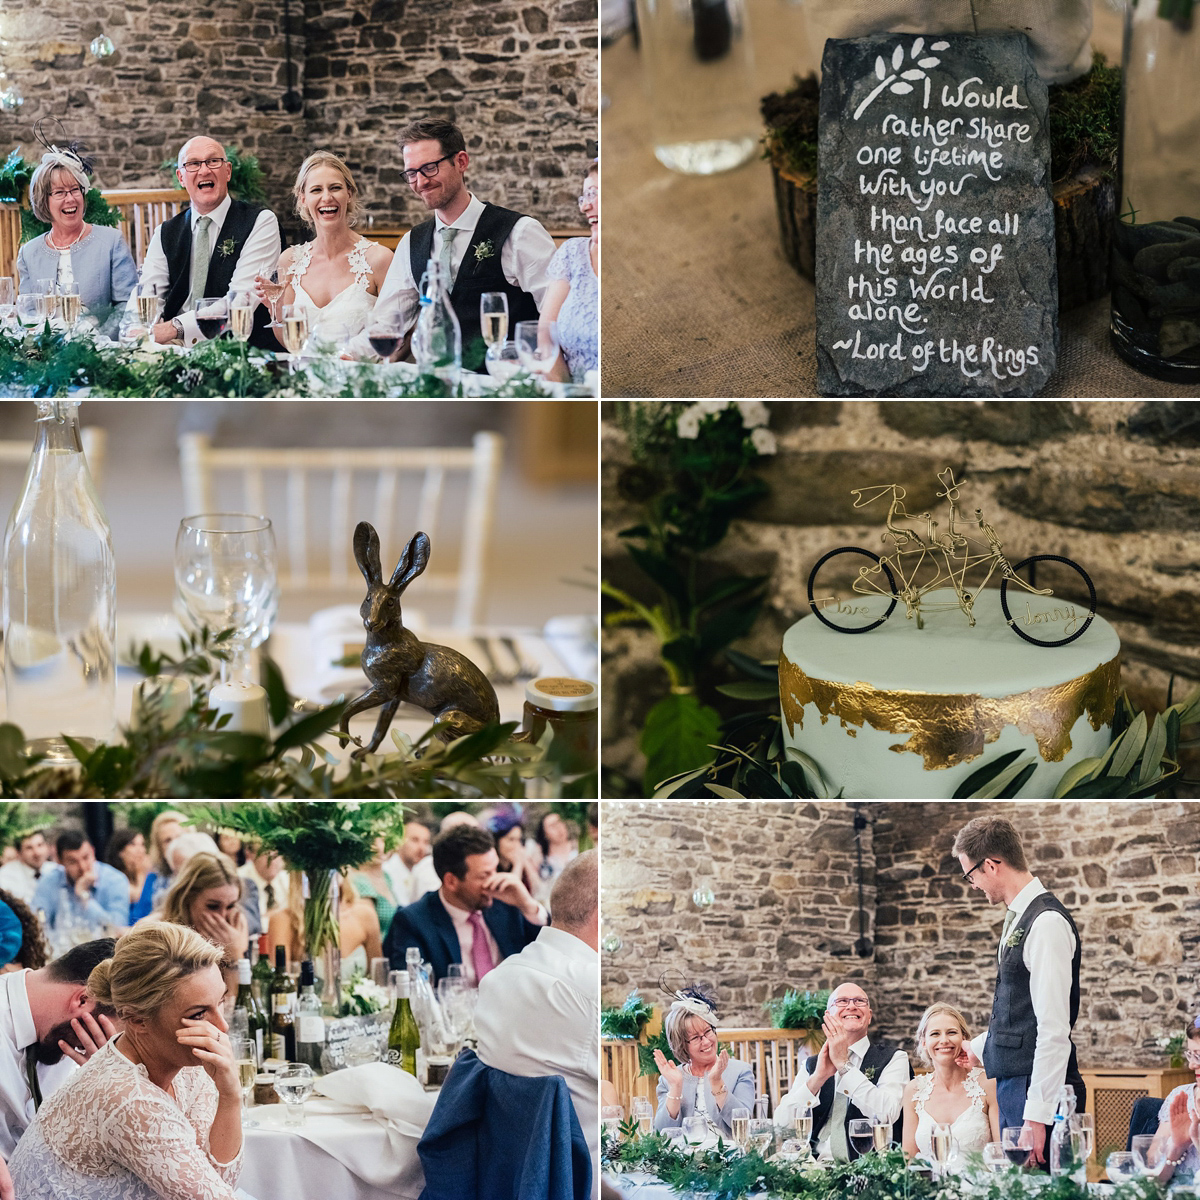 Beautiful bride Clare wore the Mariposa gown by Claire Pettibone for her laid back, fun and elegant Lake District Wedding. Photography by Lisa Aldersley.